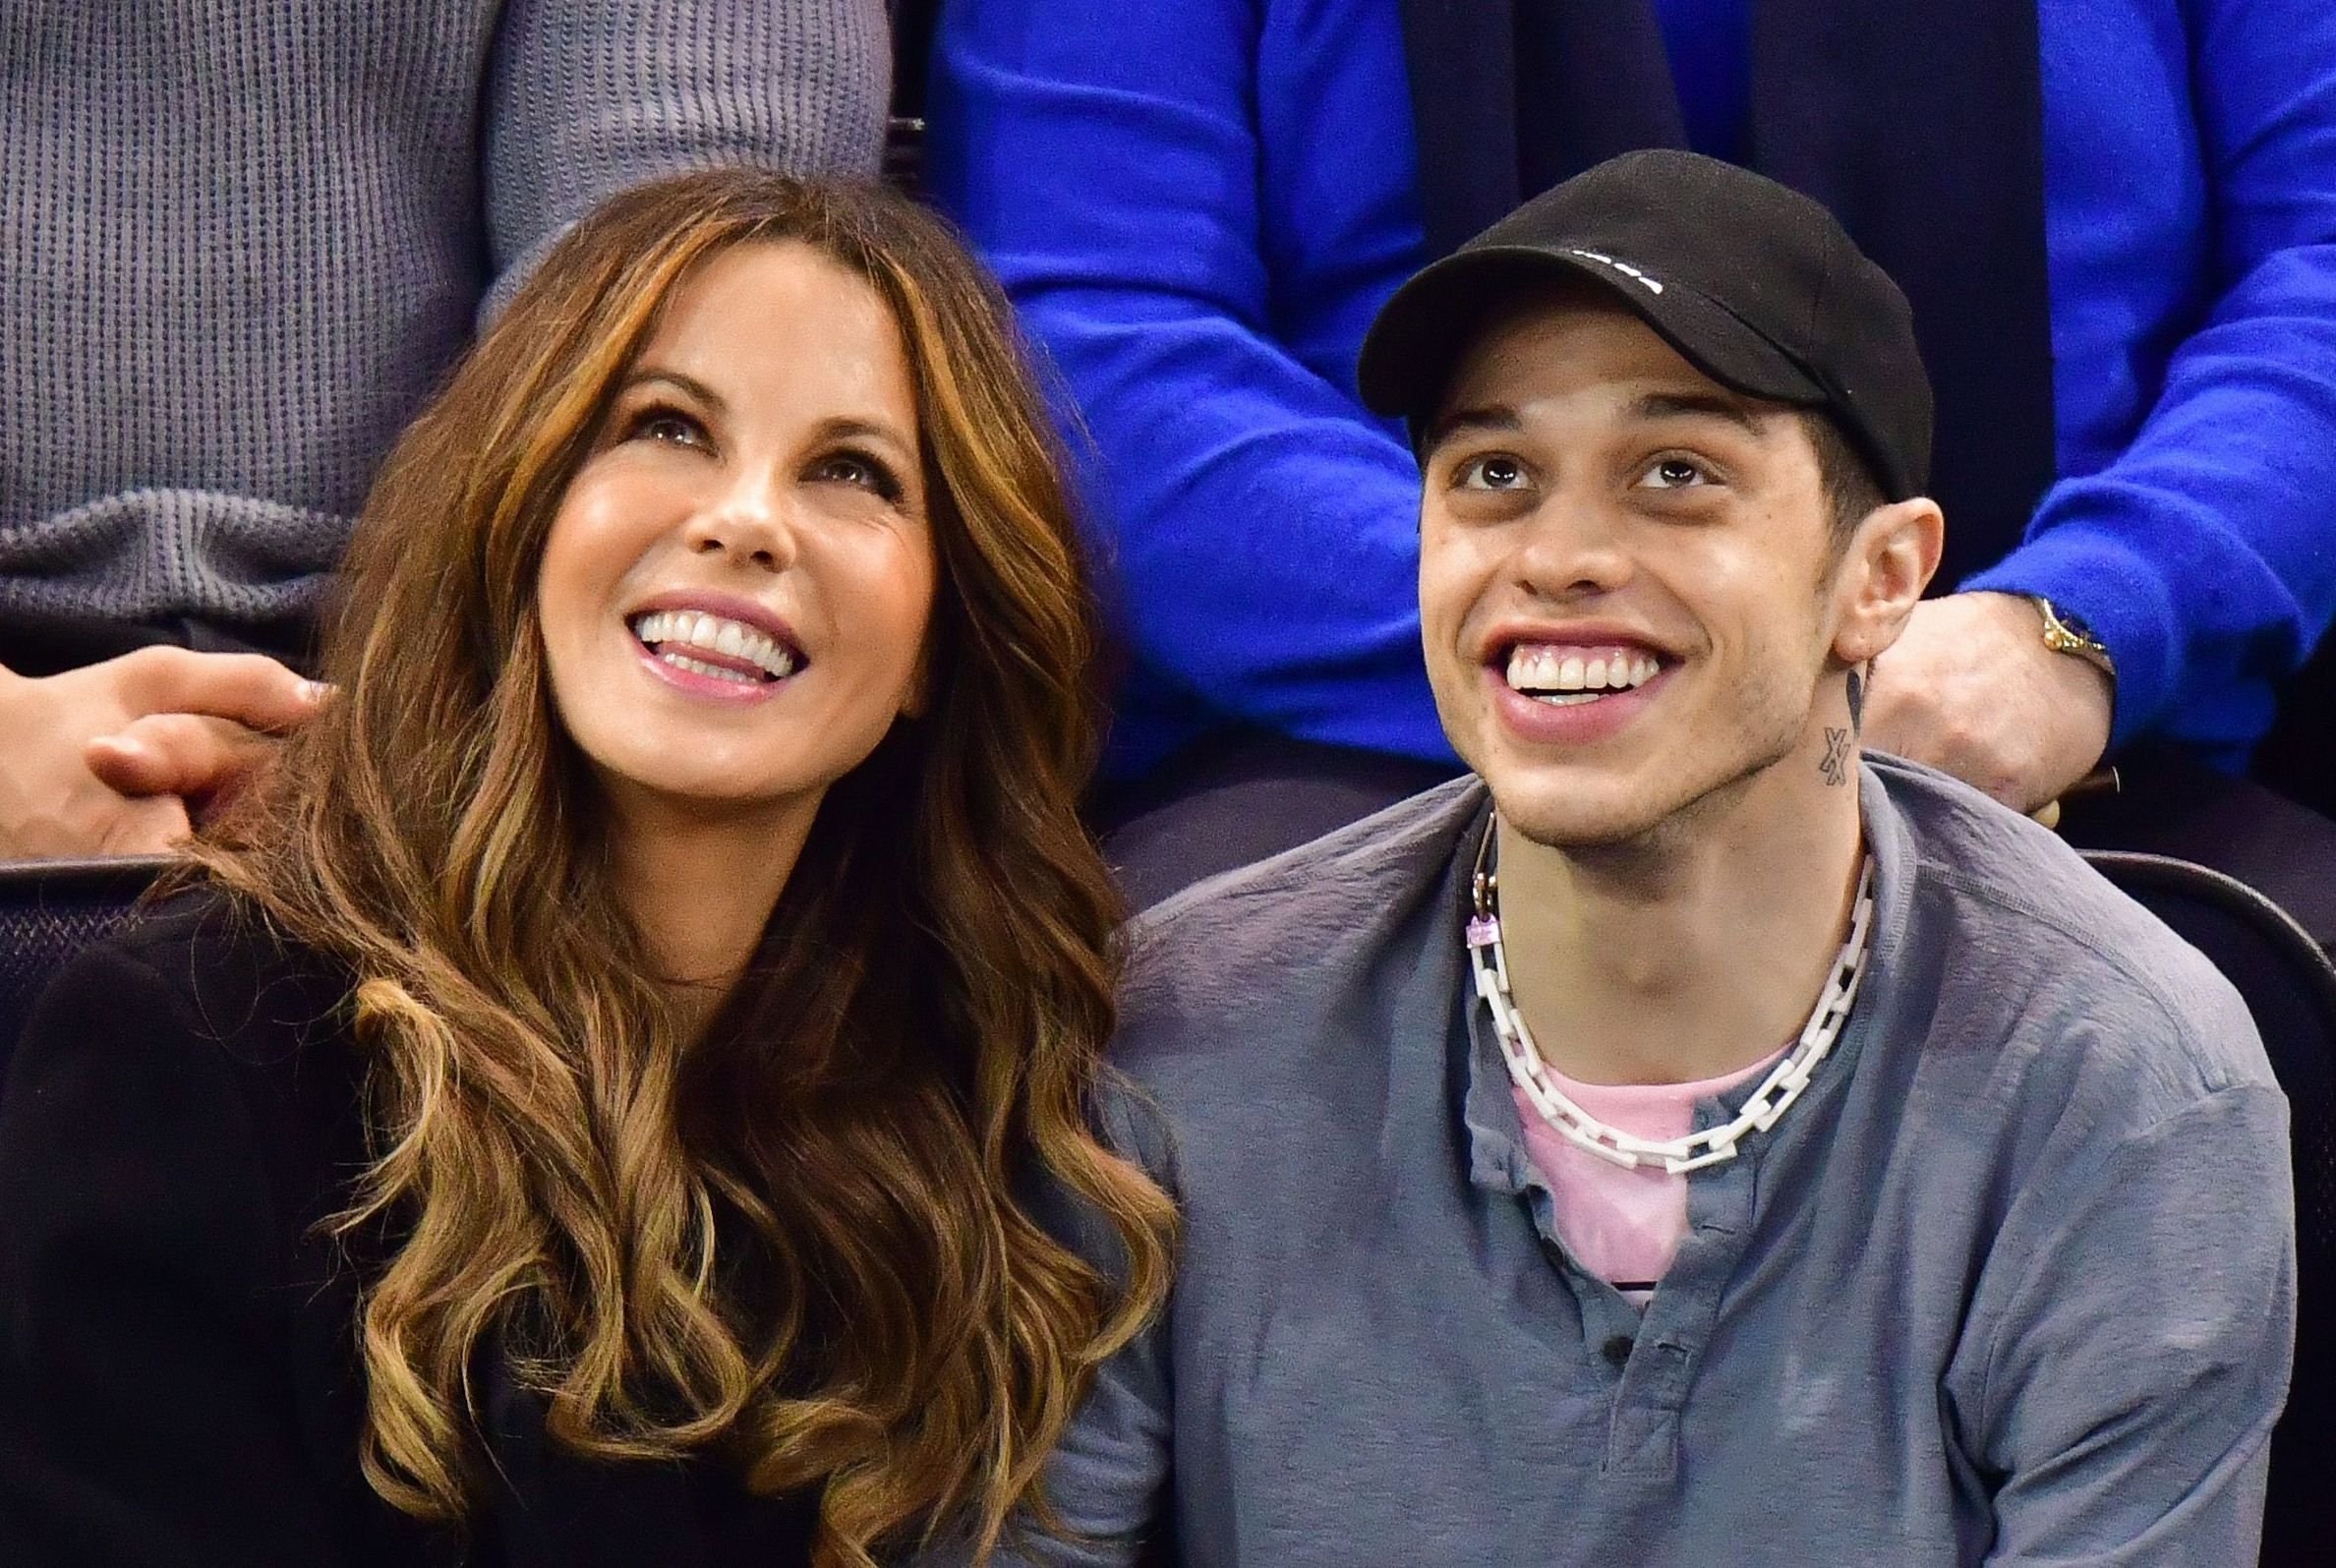 Pete Davidson has rave review for Kate Beckinsale as he opens up on relationship